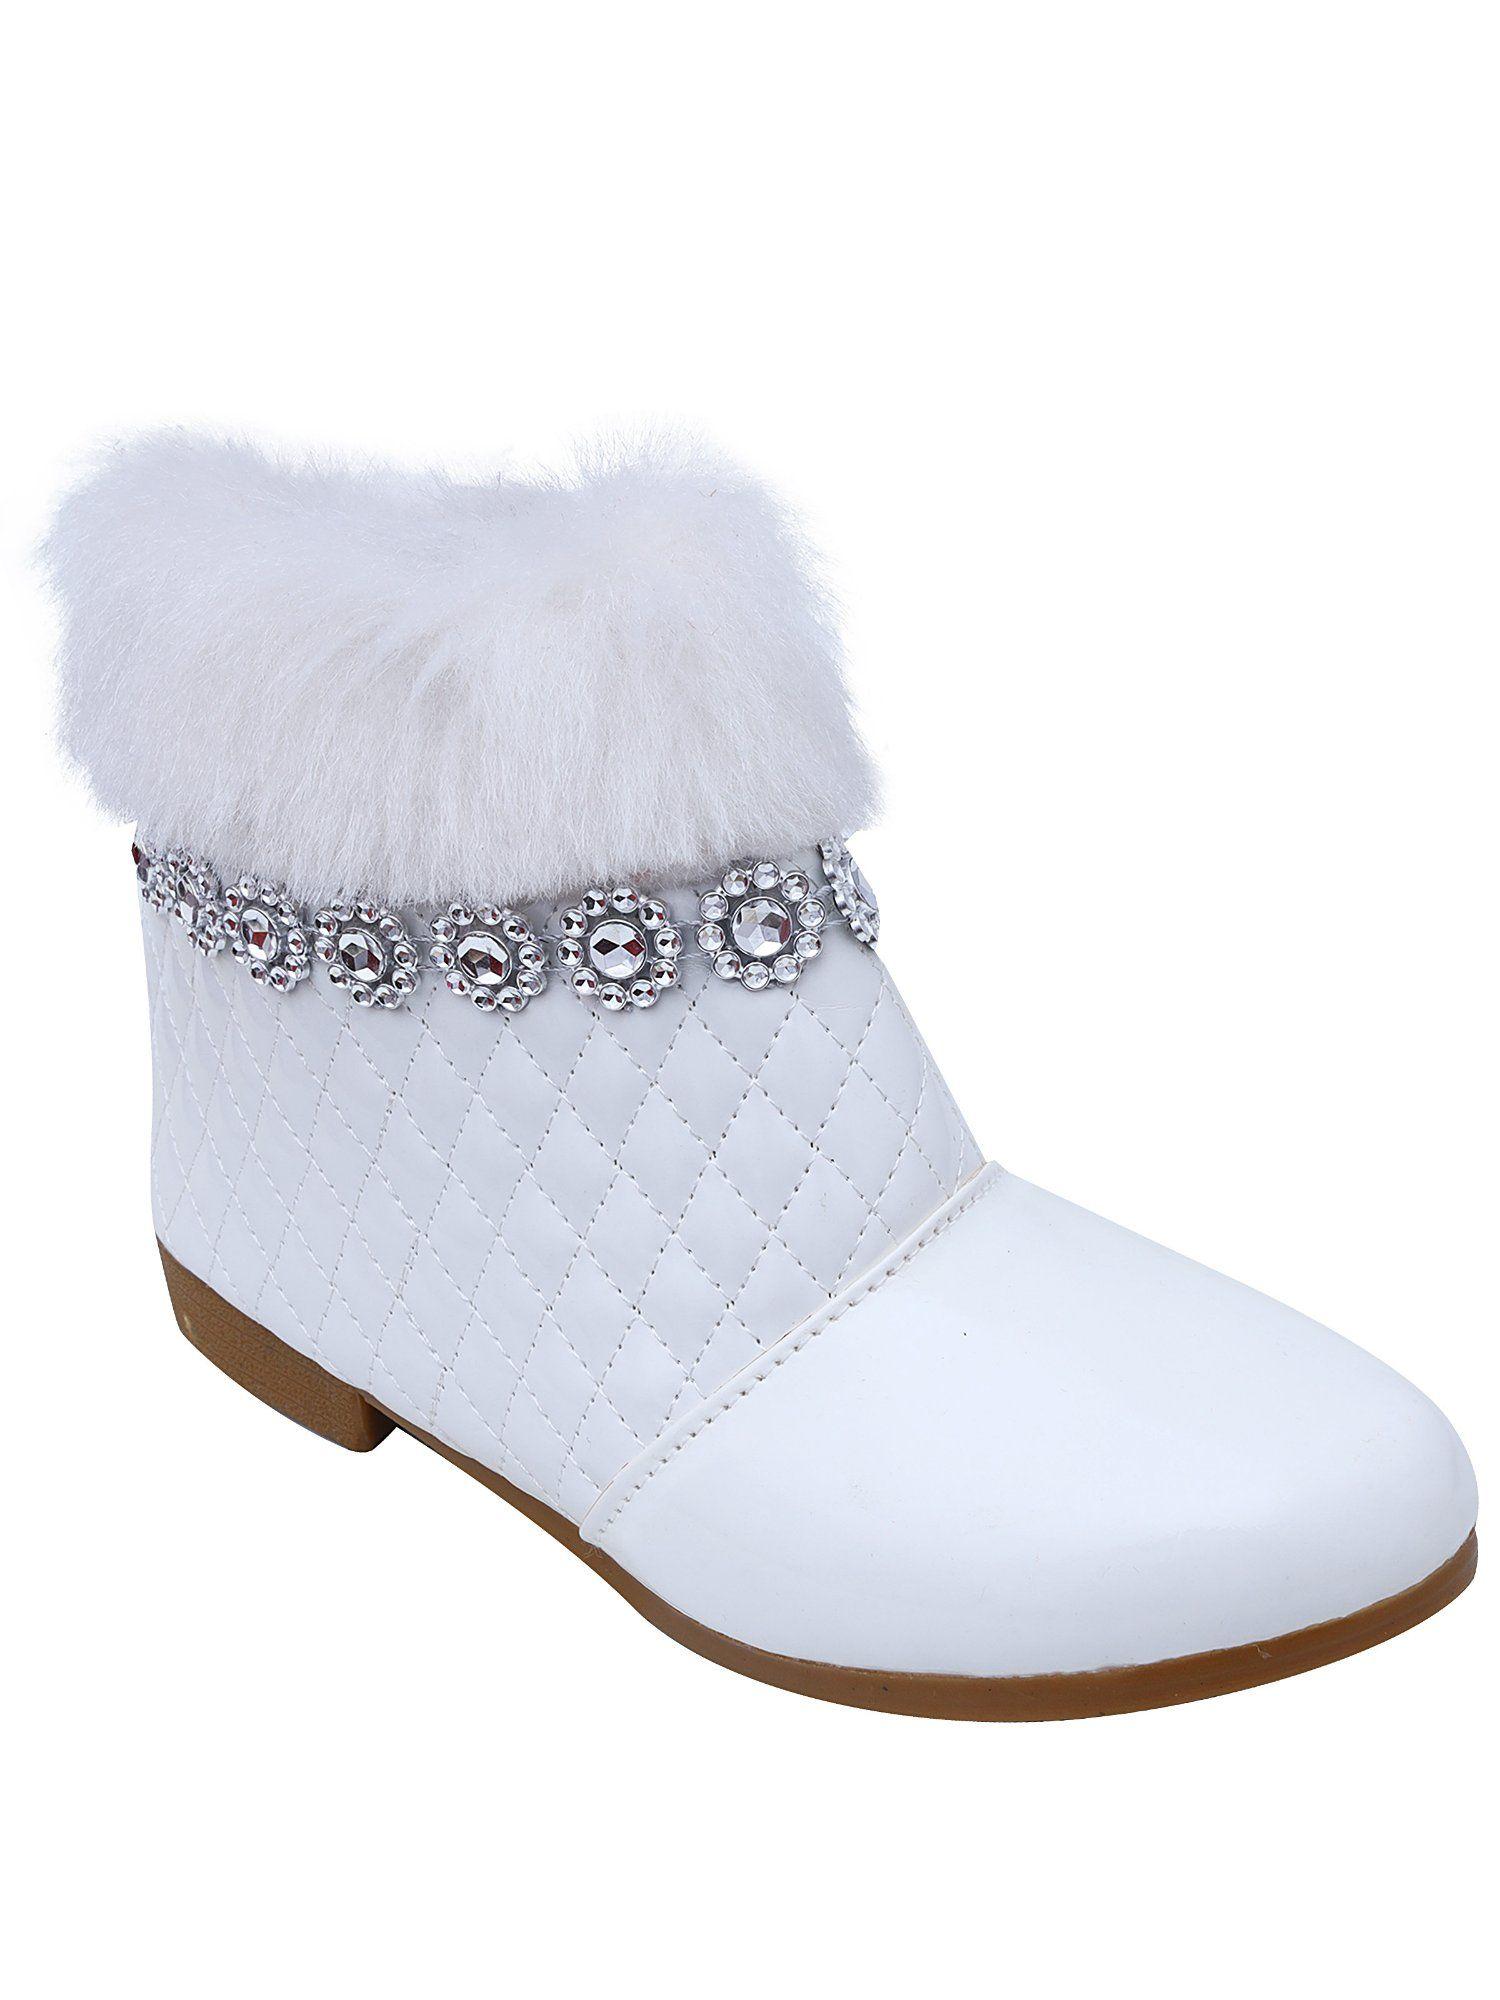 winter white boots for girls with bow applique